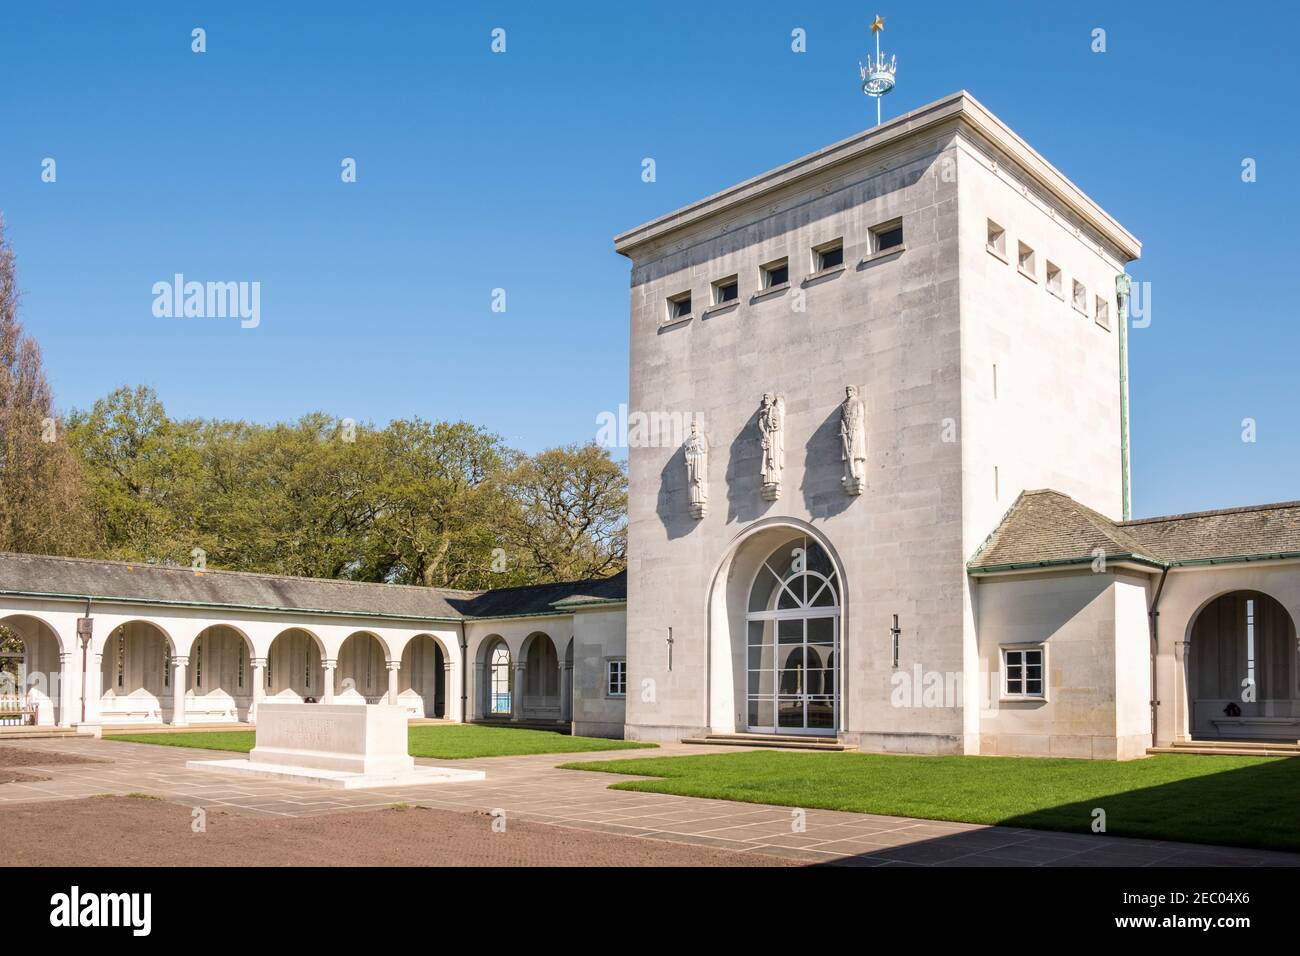 The Air Forces Memorial, or Runnymede Memorial, in Englefield Green, near Egham, Surrey, South East England, GB, UK Stock Photo